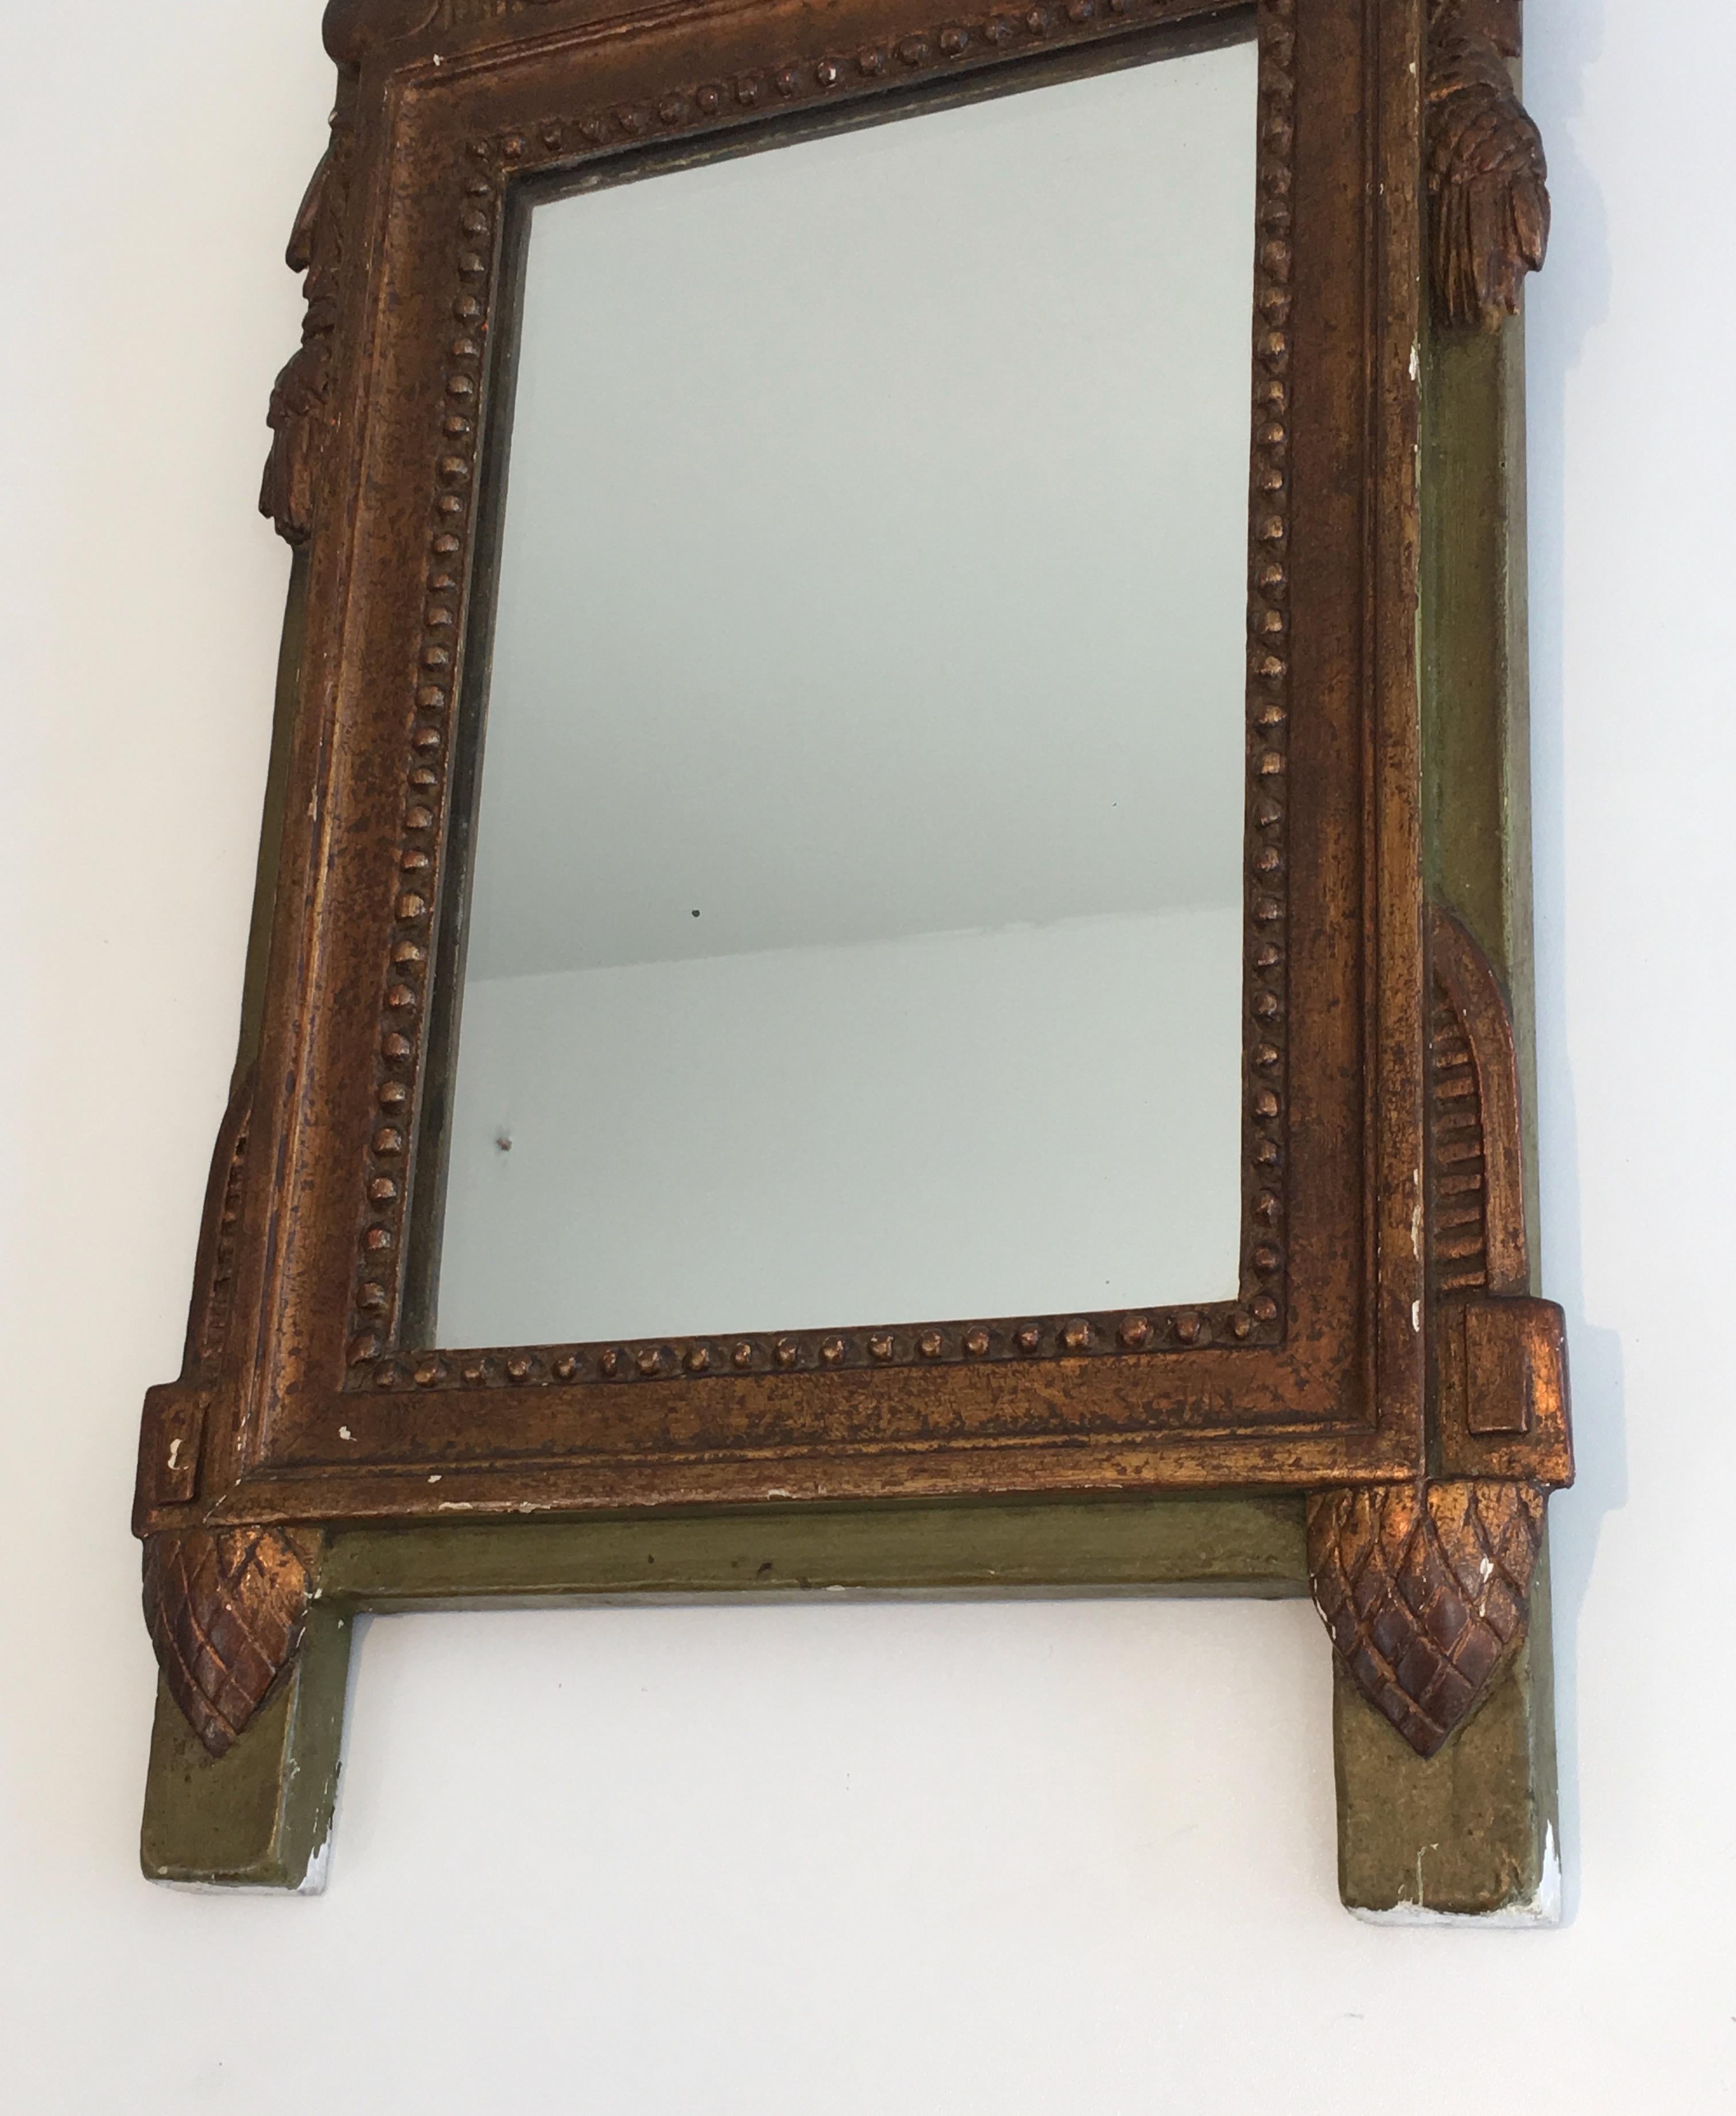 Louis the xvi Style Gilt and Painted Wood Mirror, French, 19th Century For Sale 2